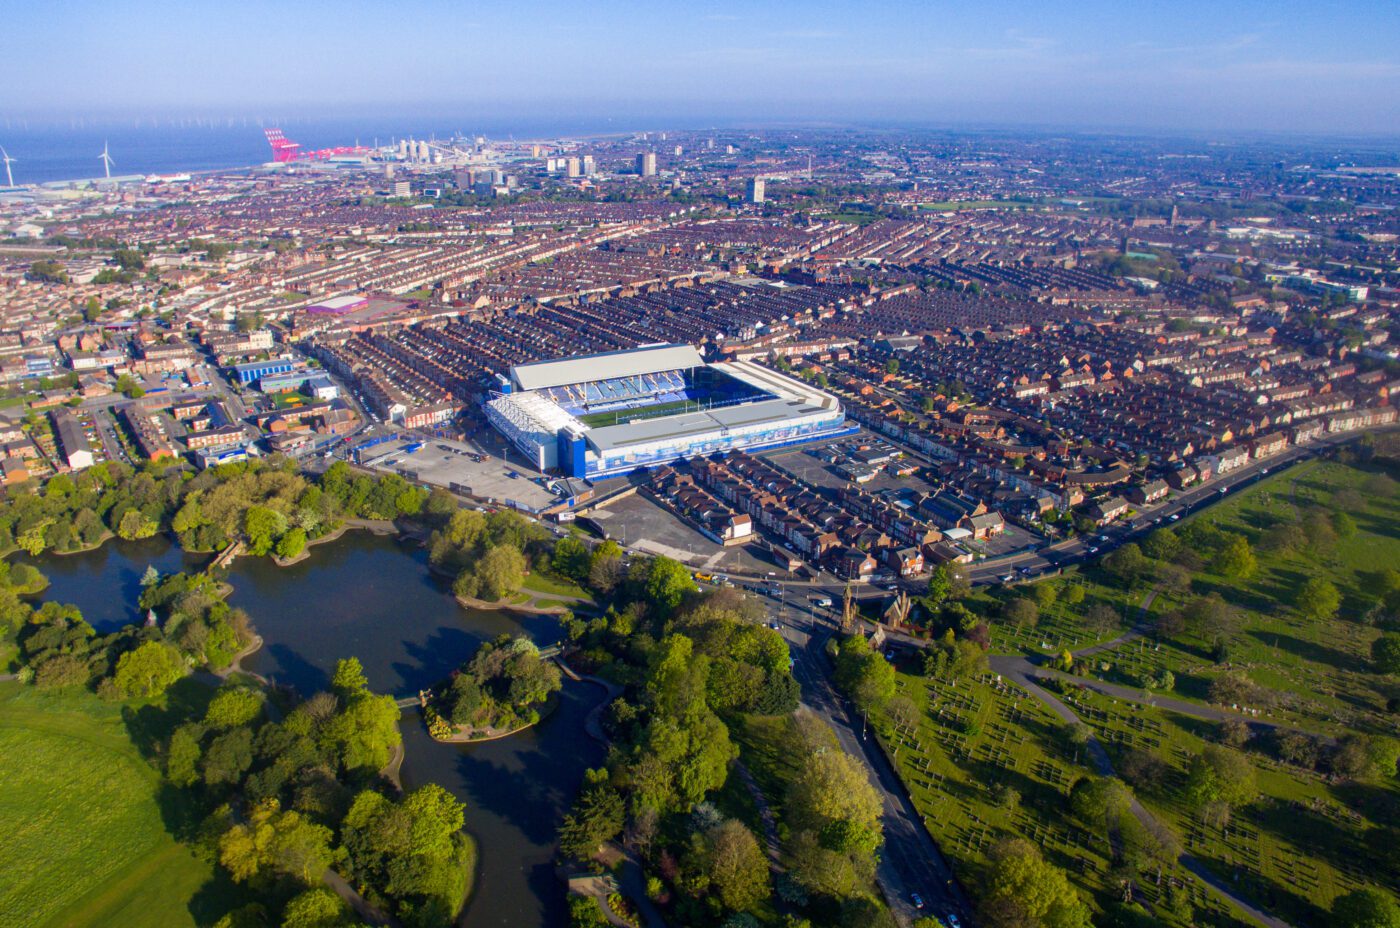 Everton Football Club - taken from above with view over the Goodison Park, Everton, Walton, in outer Liverpool areas. Cloudless blue sky on a non match day.